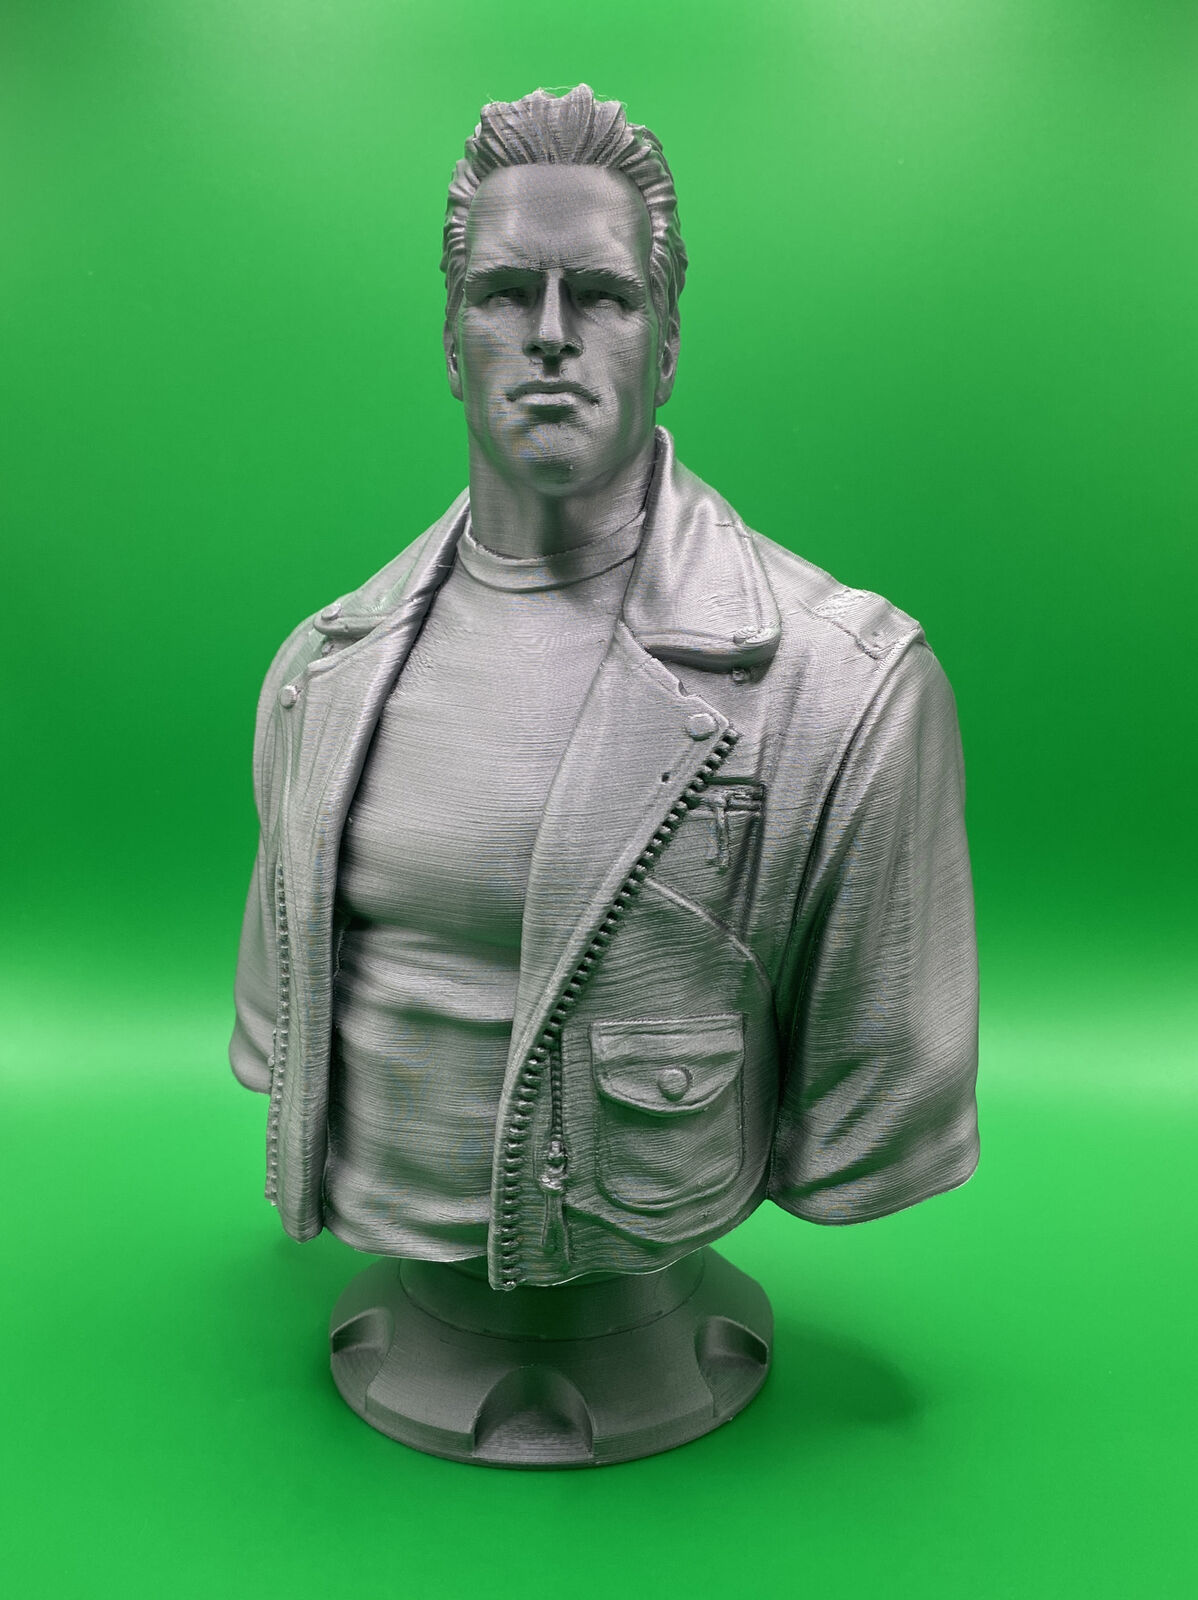 Terminator | 3D Printed Figure | Paintable Plastic Filament | 7 Inches Tall